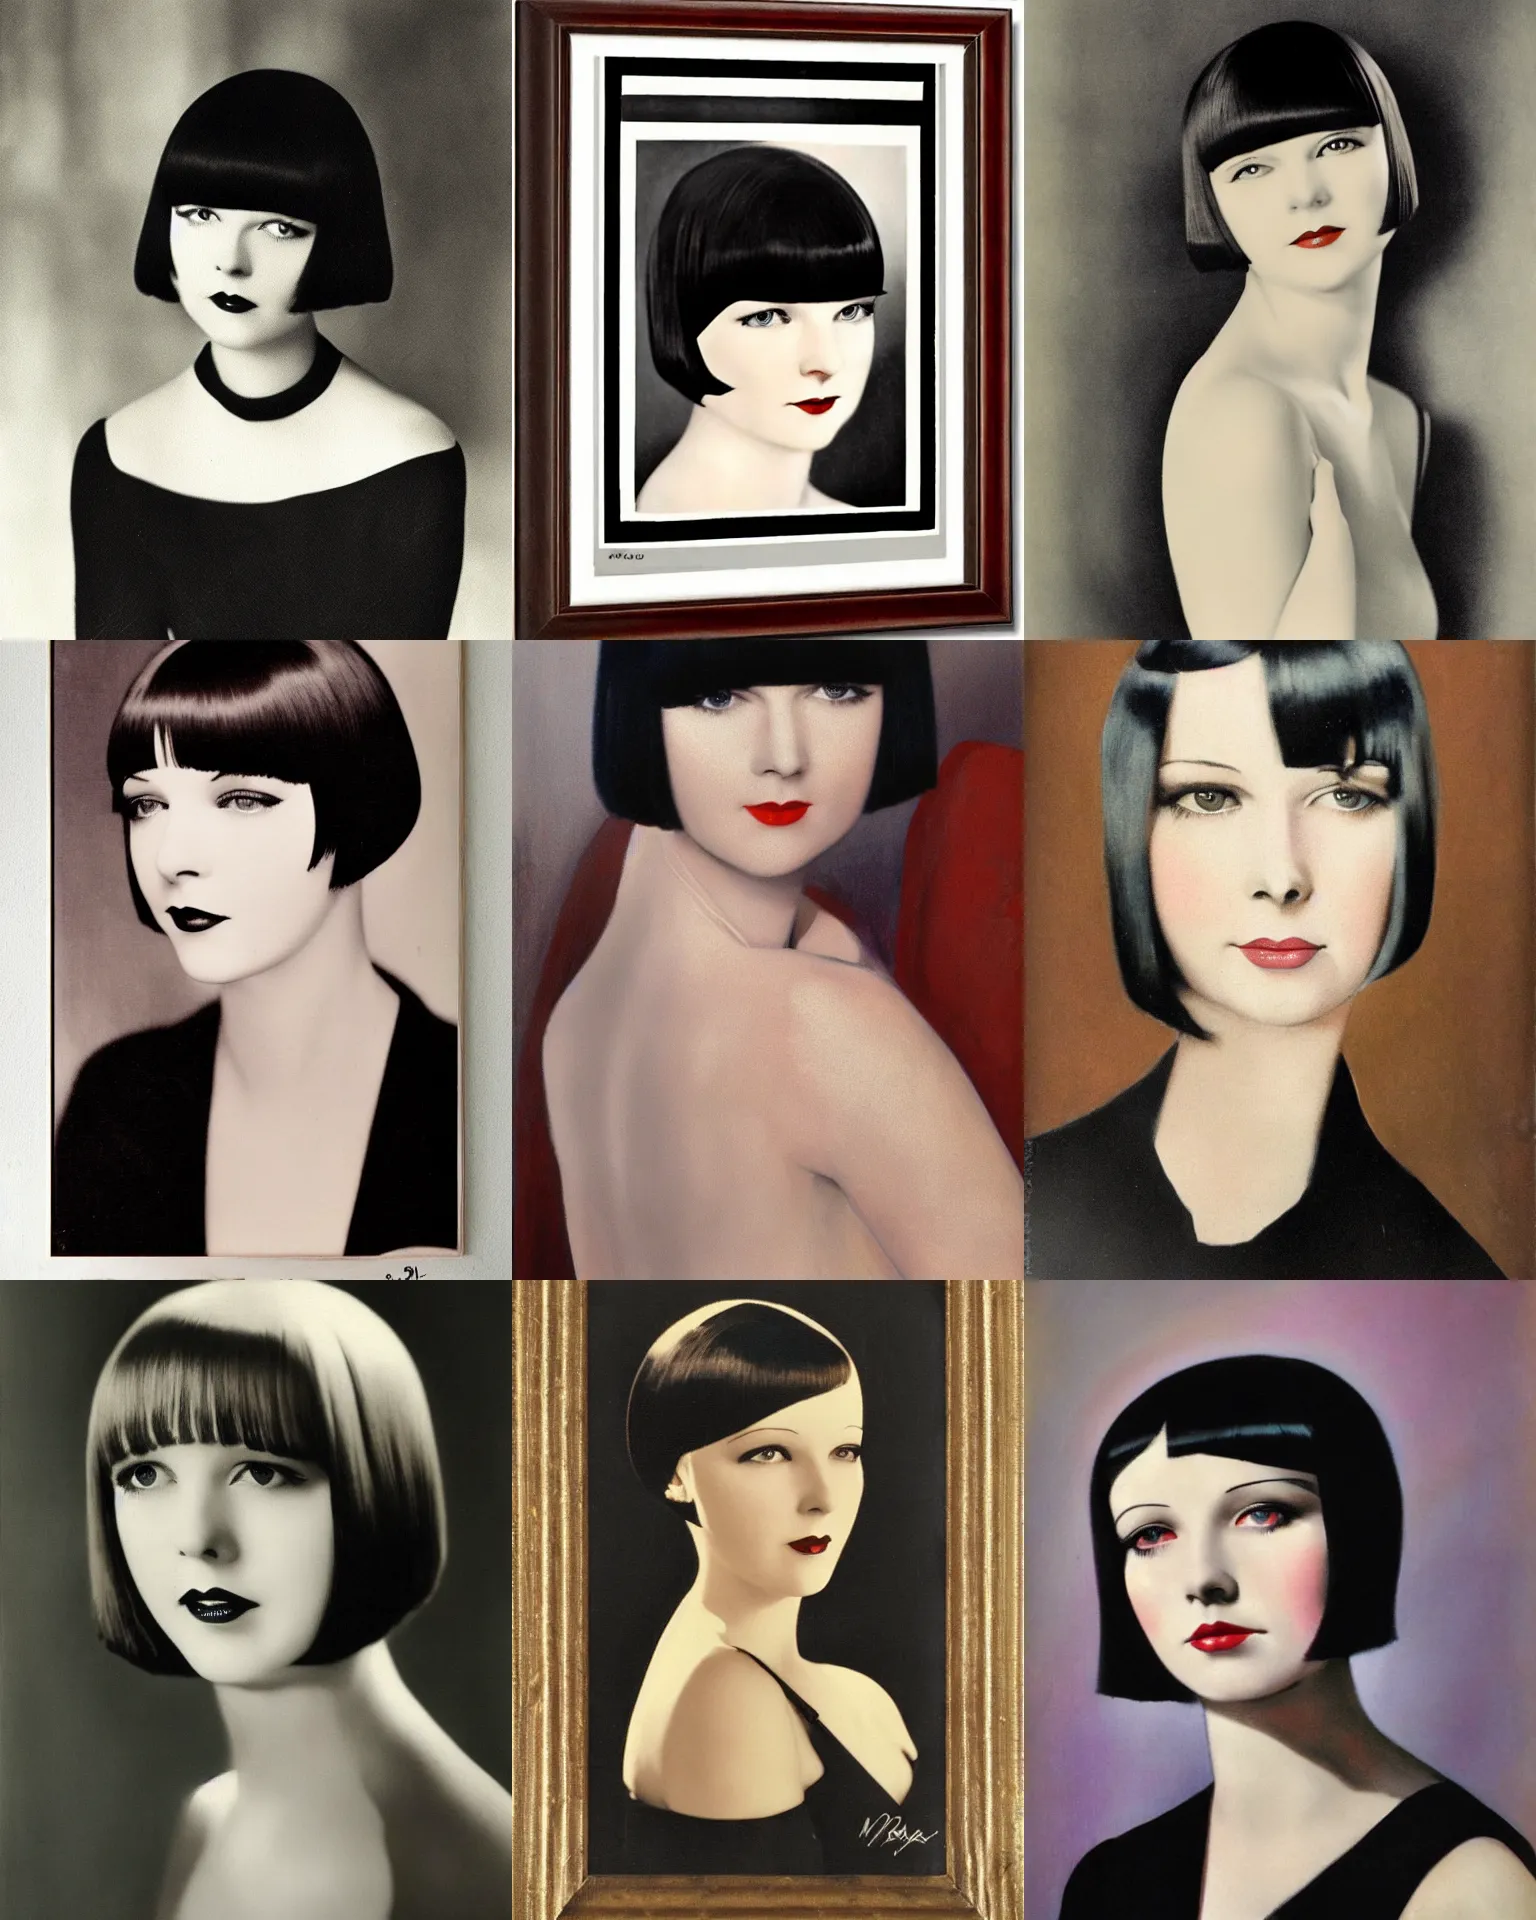 Prompt: mary louise brooks 2 0 years old, bob haircut, portrait by robert mallet - stevens, 1 9 2 0 s, art decos